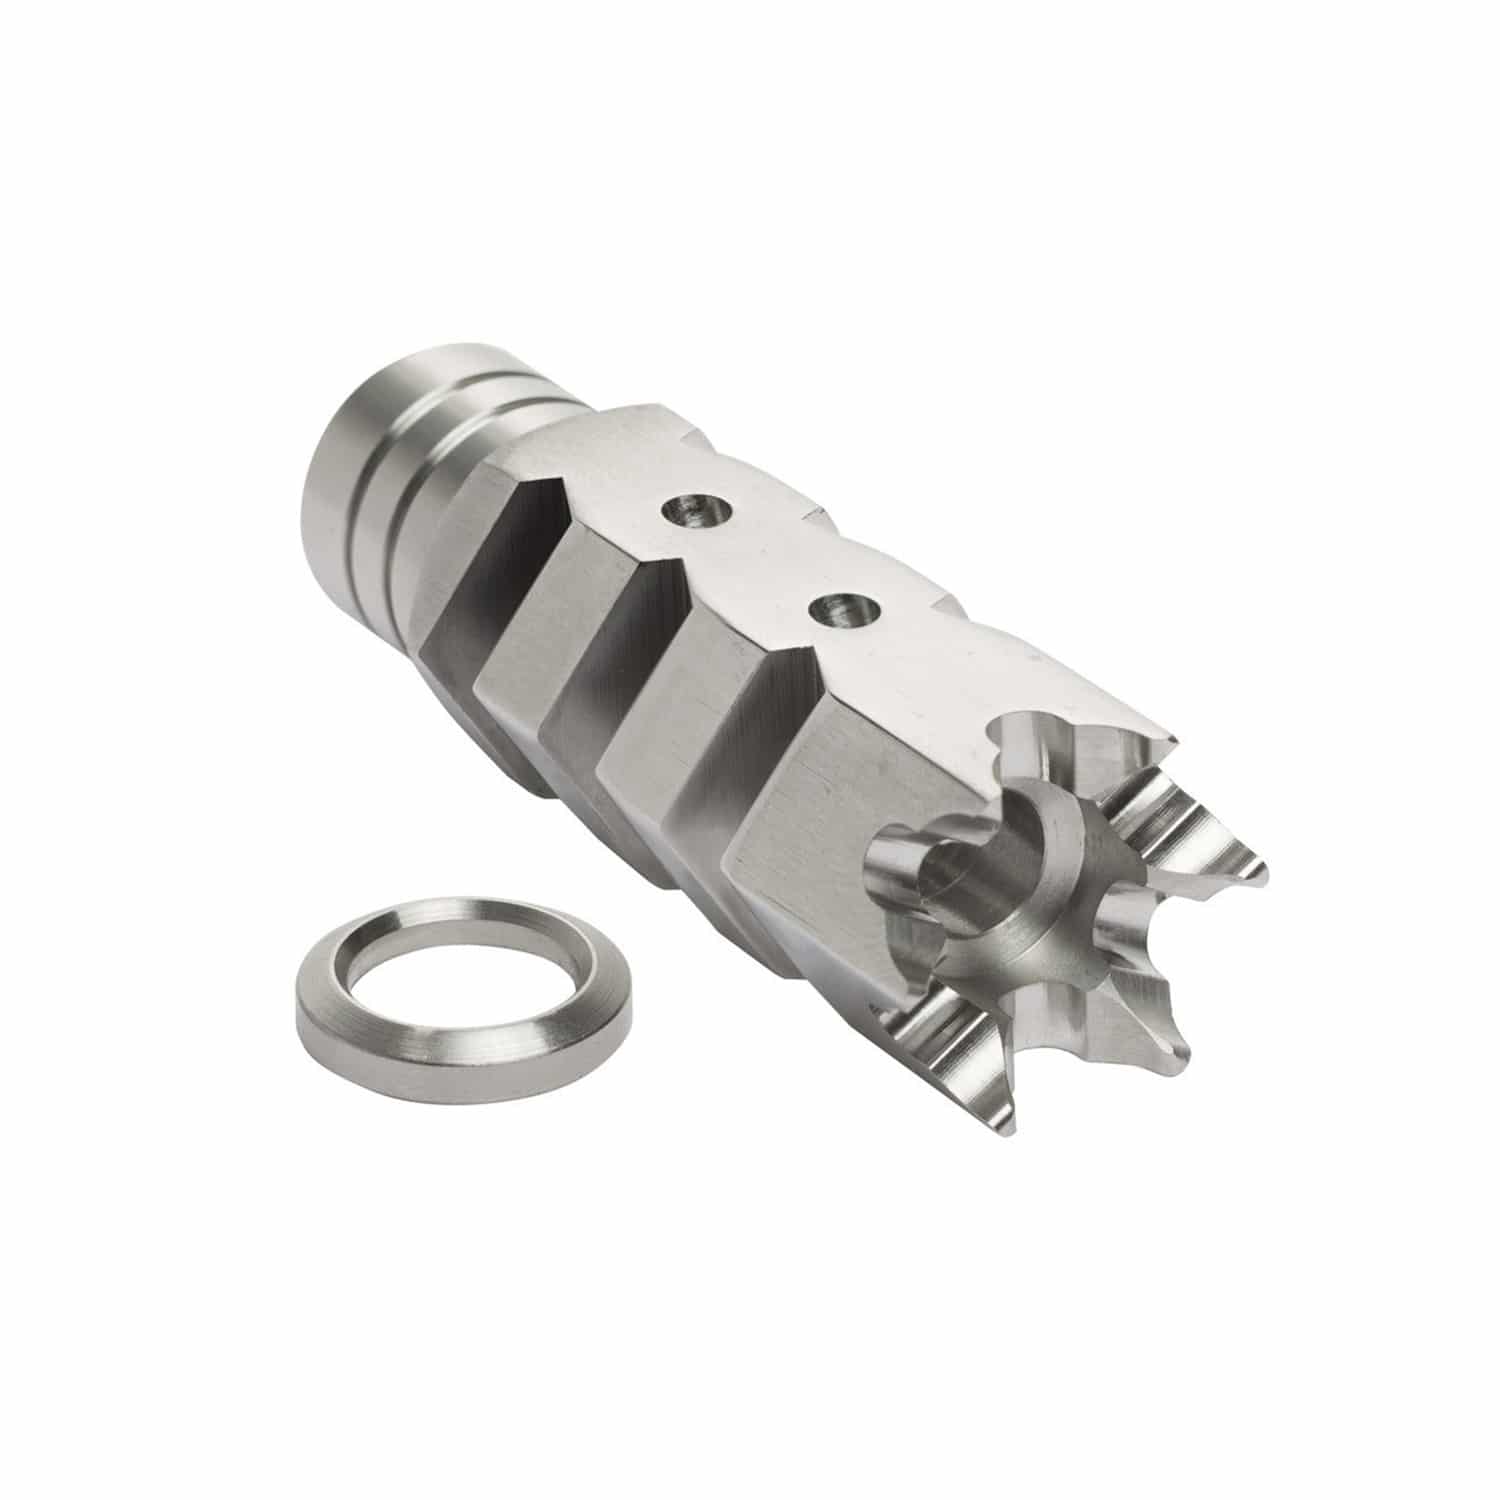 223 Muzzle Brake With Free Crush Washer Stainless Steel 1/2-28 Thread 